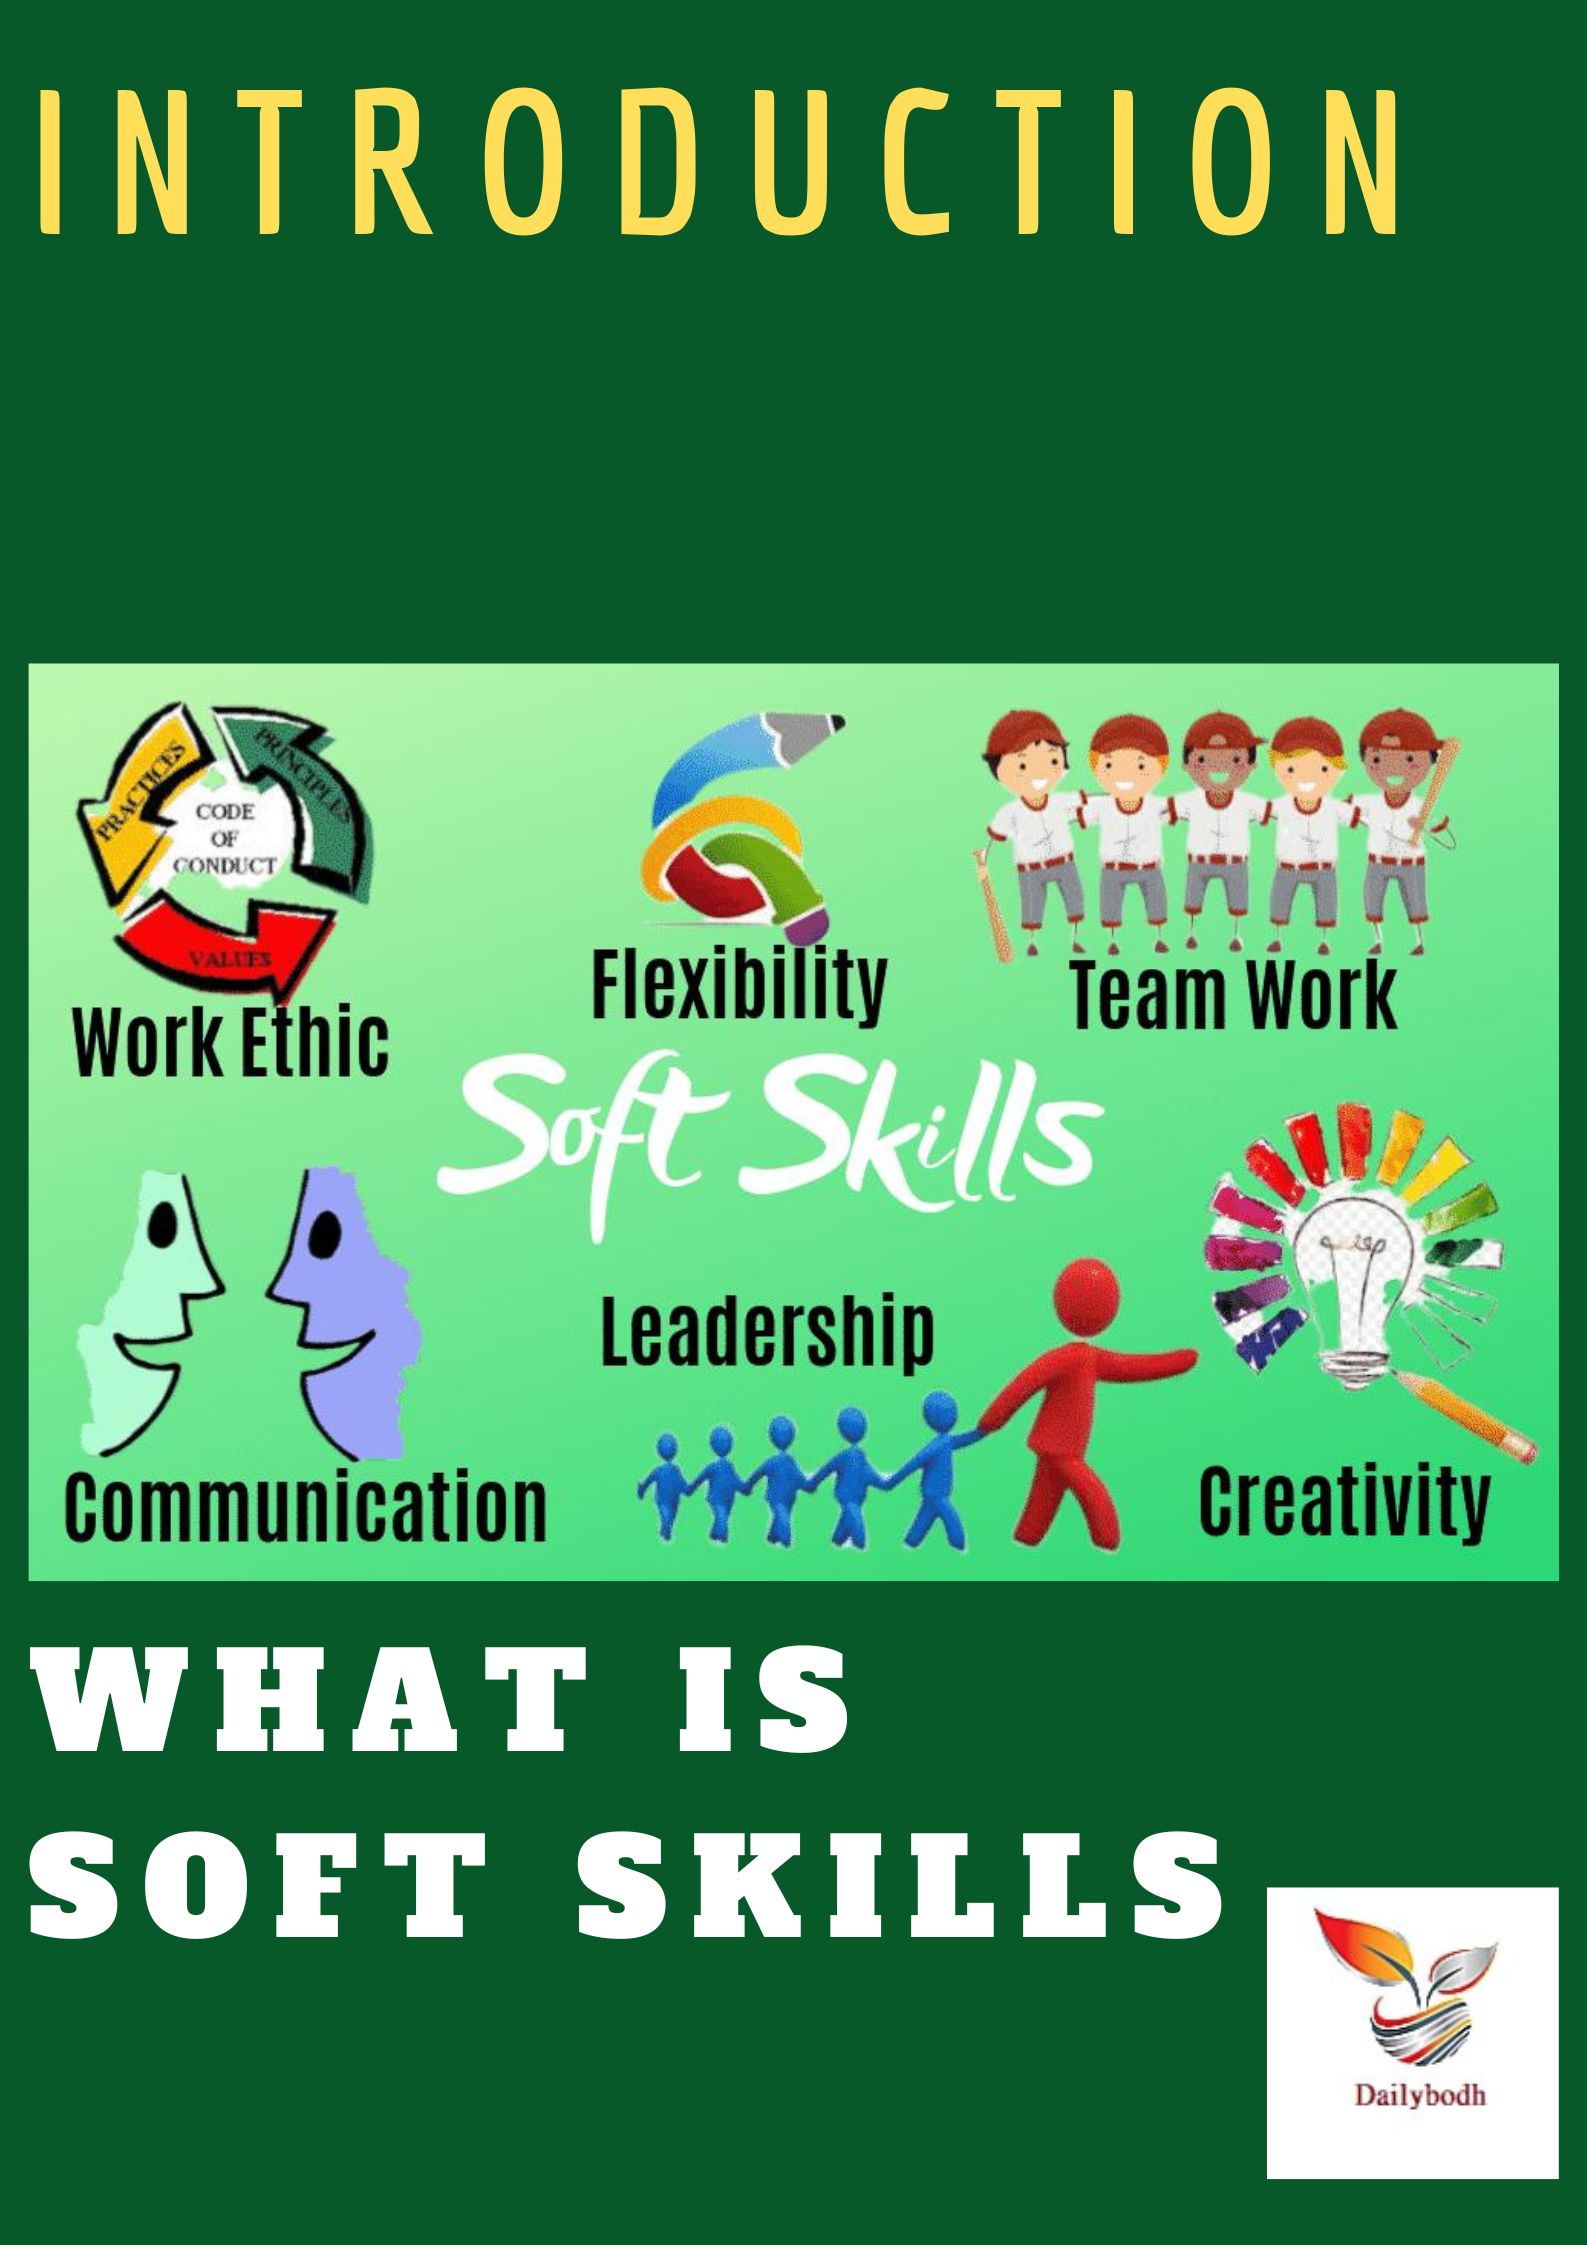 What are soft skills